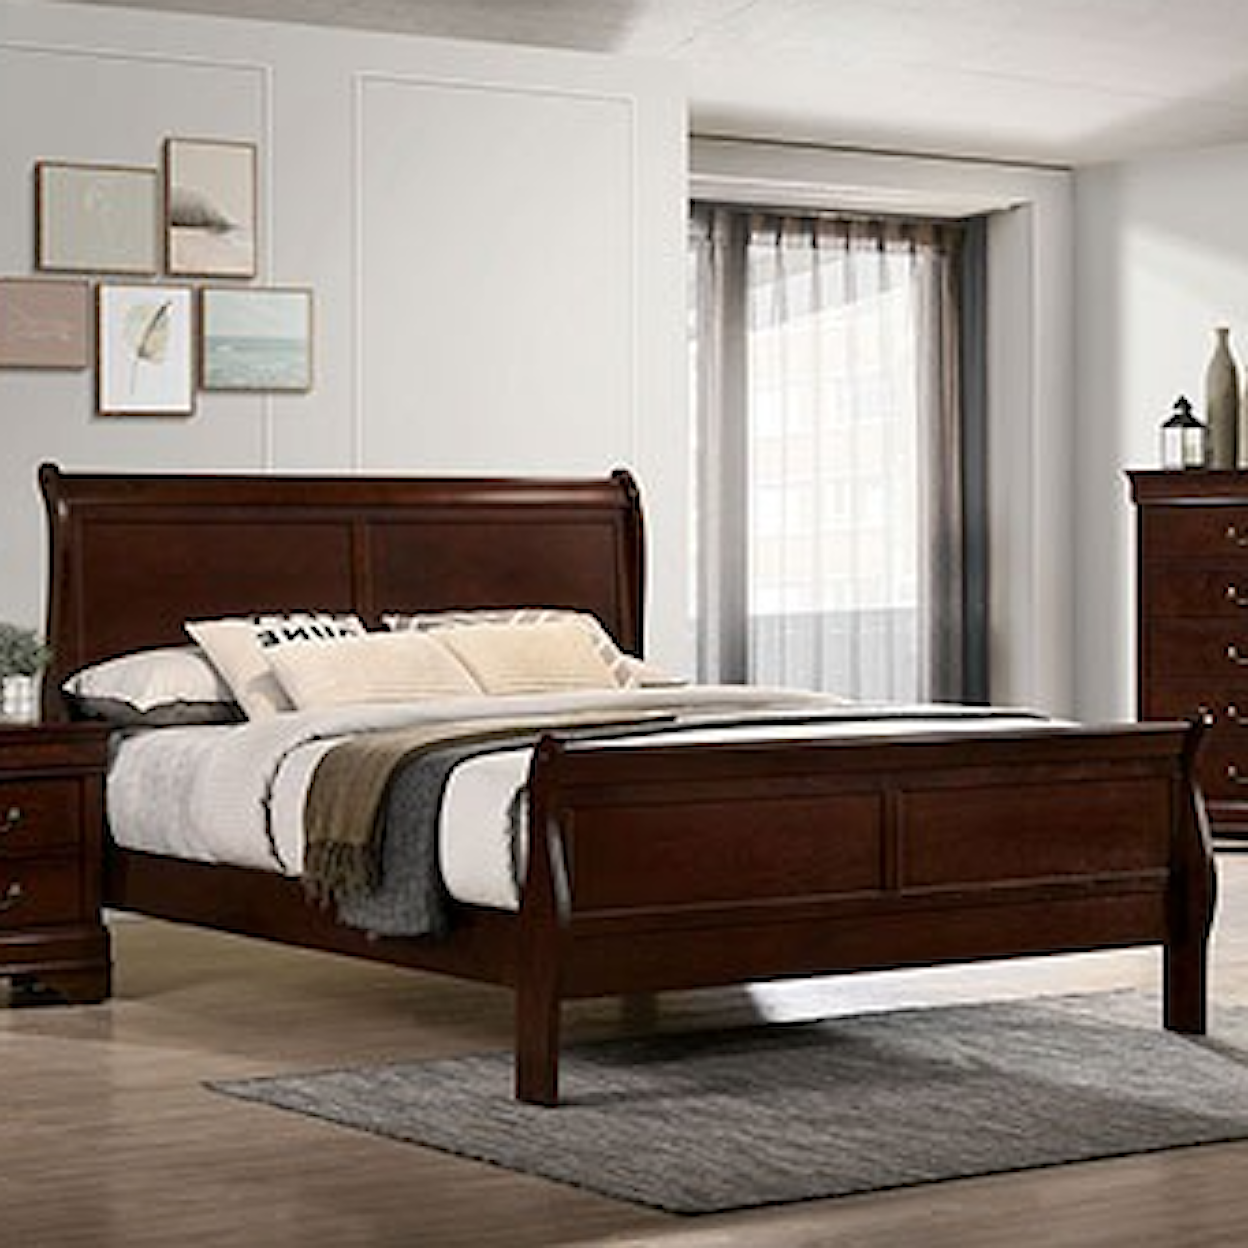 FUSA Louis Philippe Cal. King Bed, Cherry